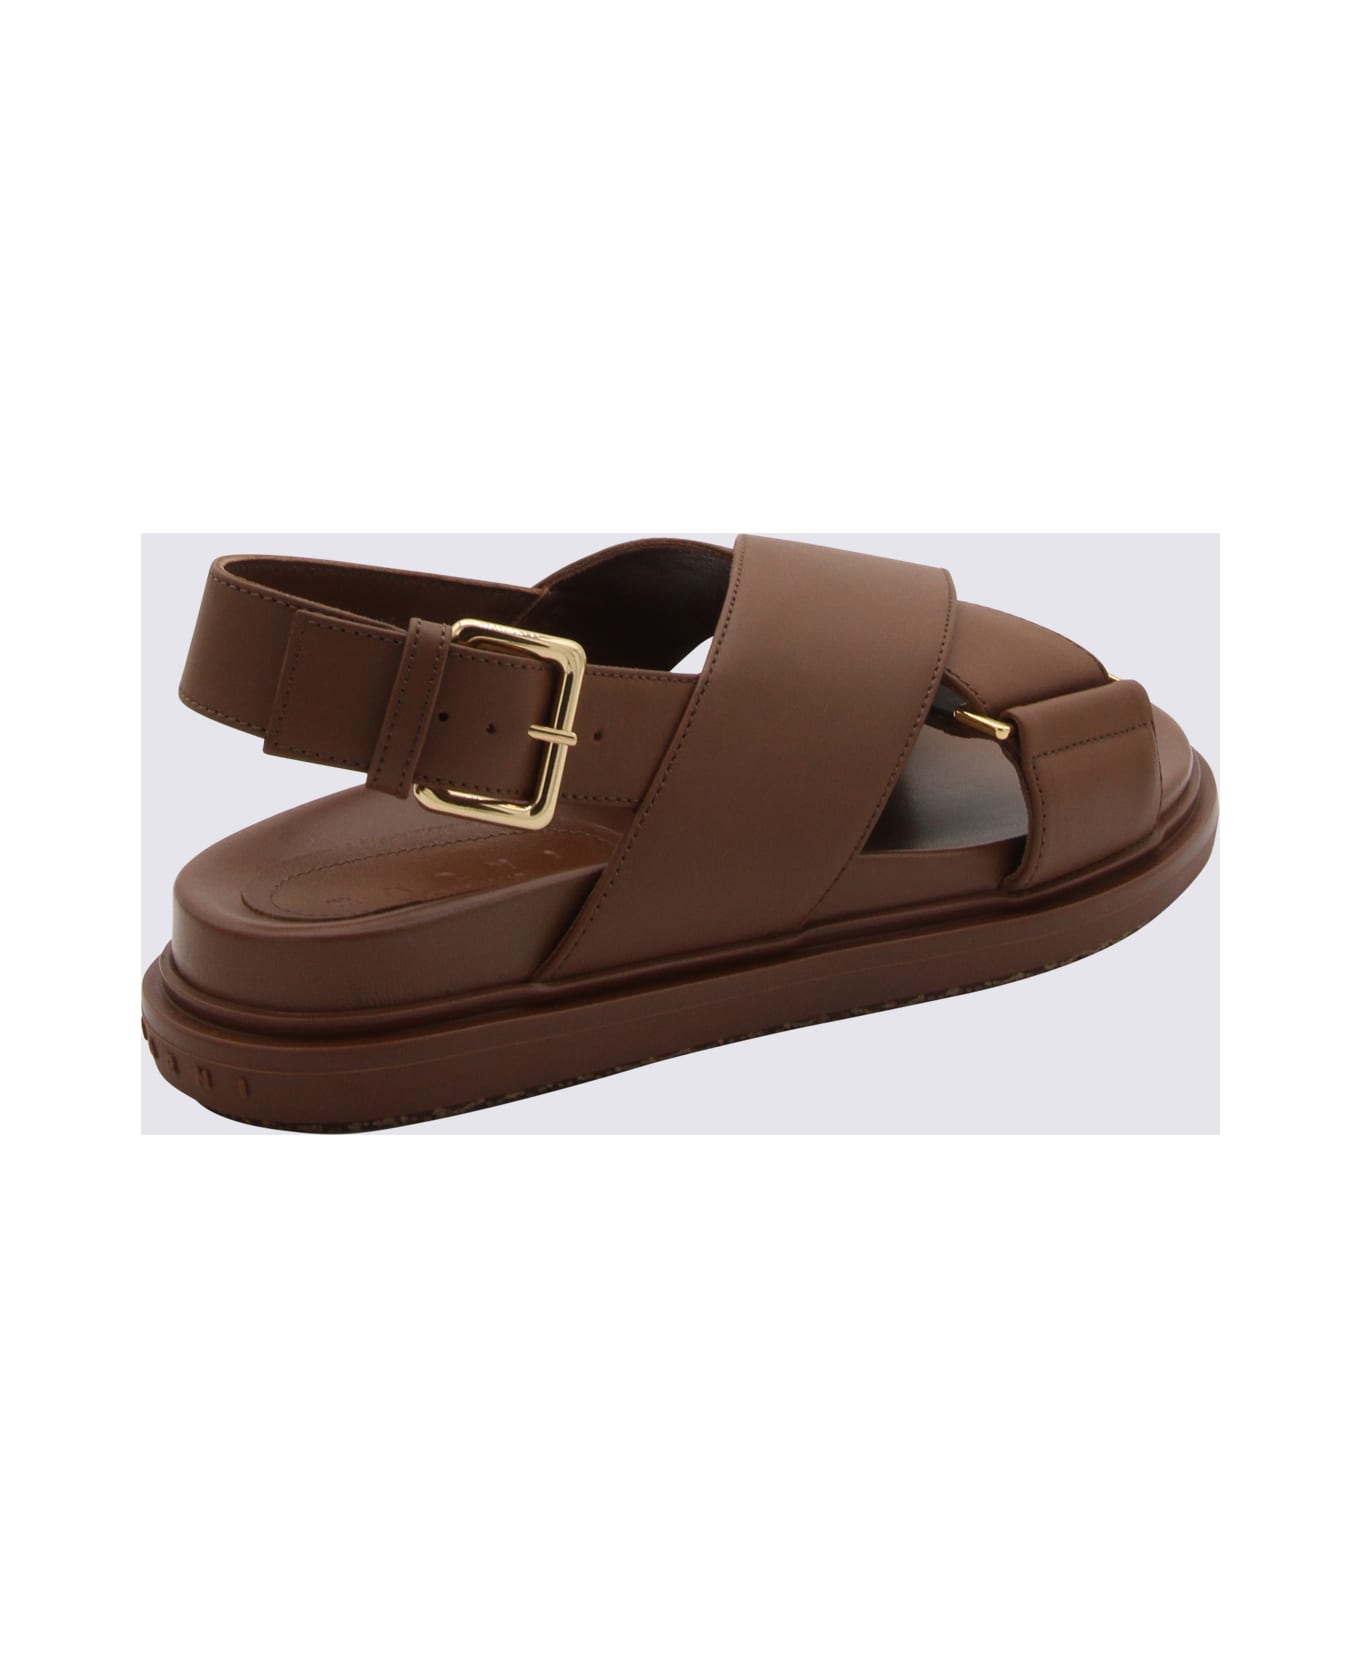 Marni Brown Leather Fussbet Sandals - Brown サンダル